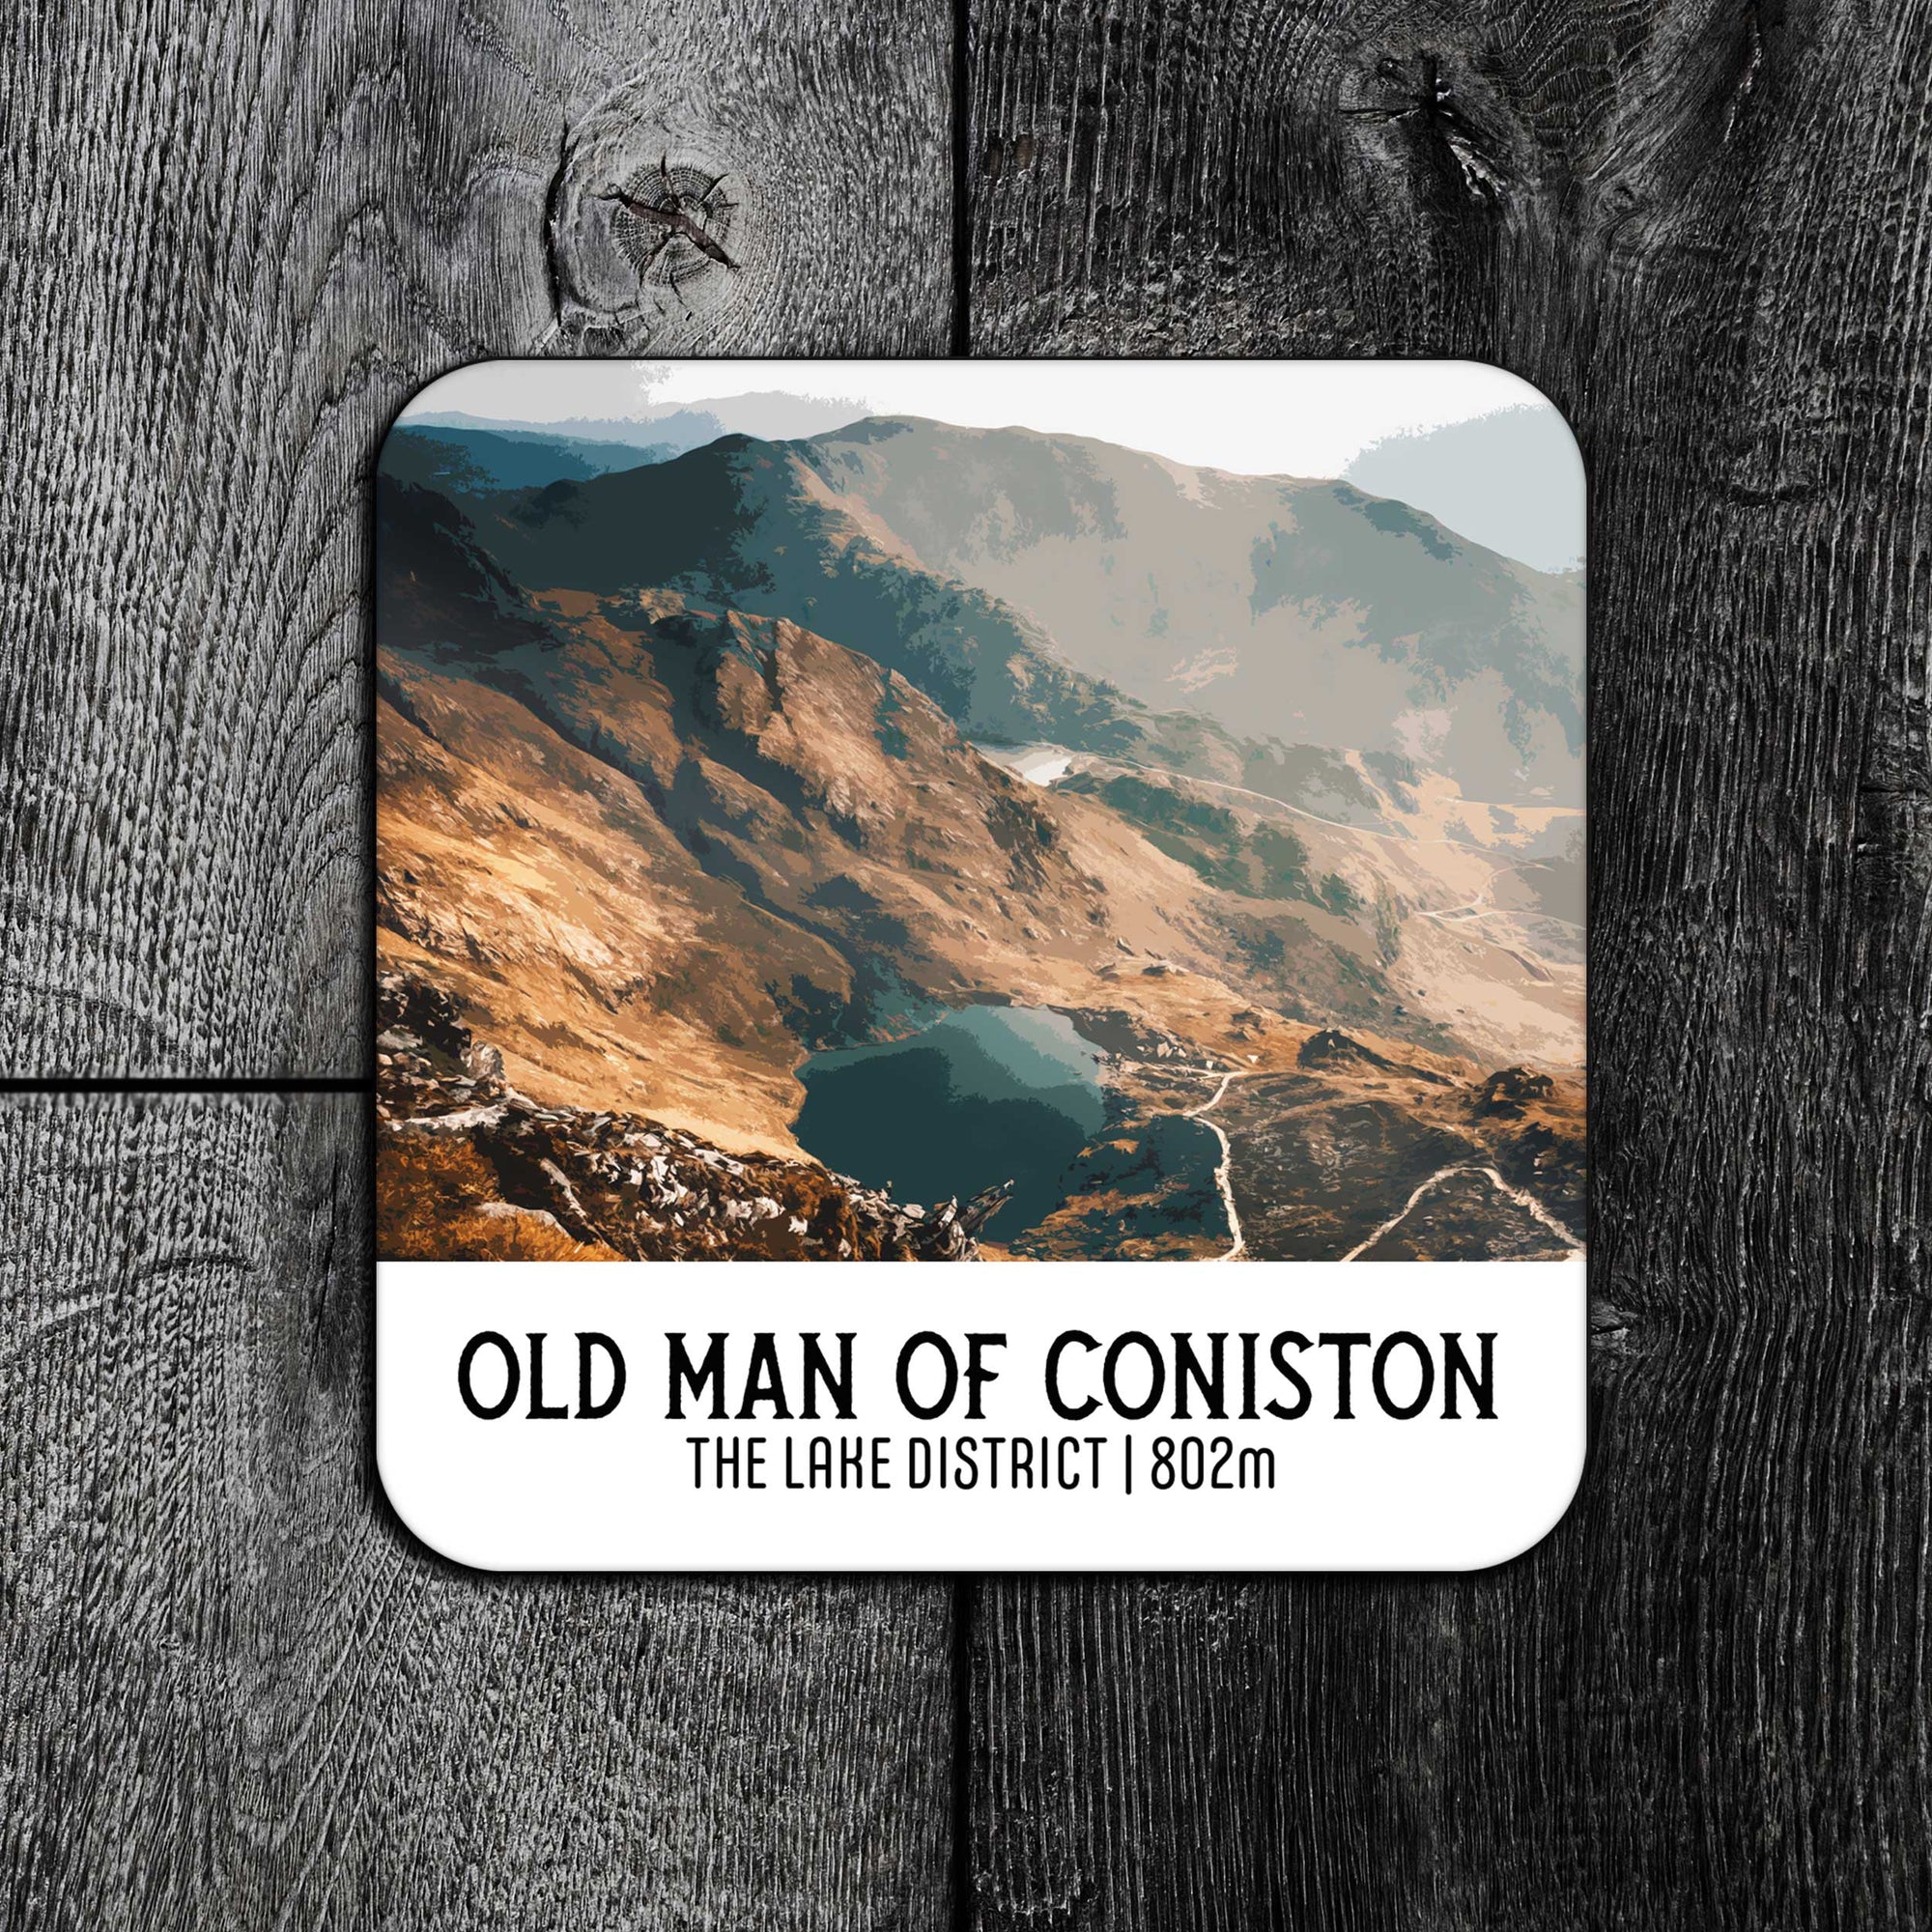 Vintage Coniston Old Man Scenic Travel Coaster: Old Man of Coniston Path View